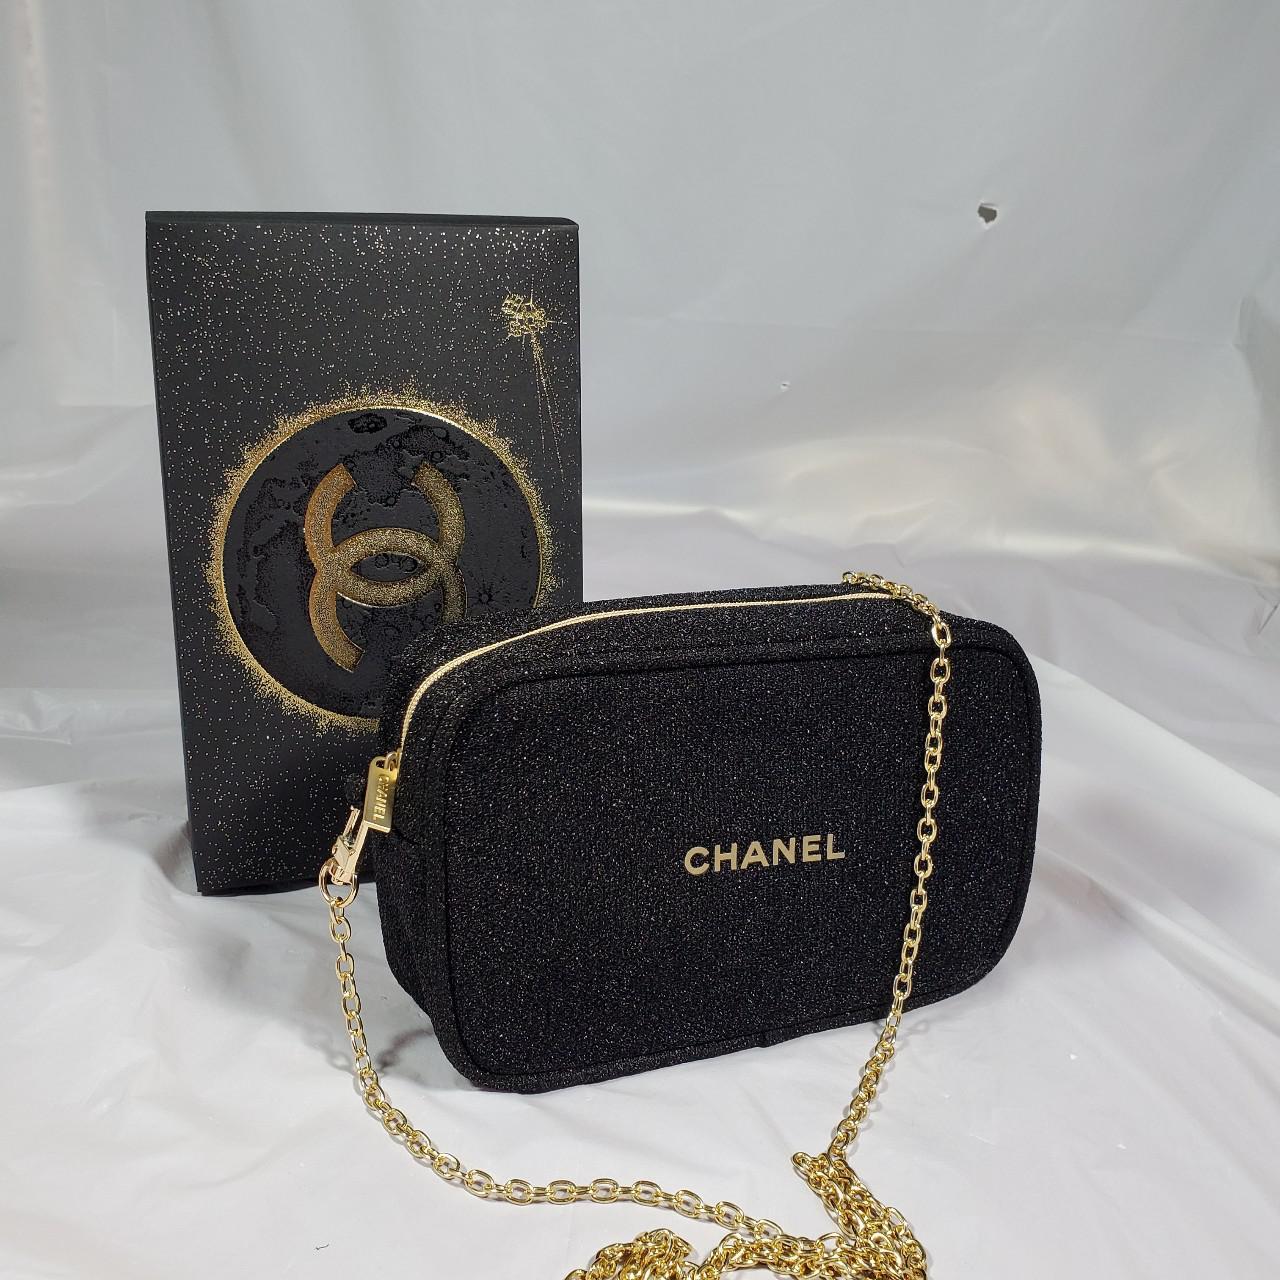 Chanel Makeup Brushes in Black case and gift bag  Accessories  Gumtree  Australia Sutherland Area  Gymea  1301822896